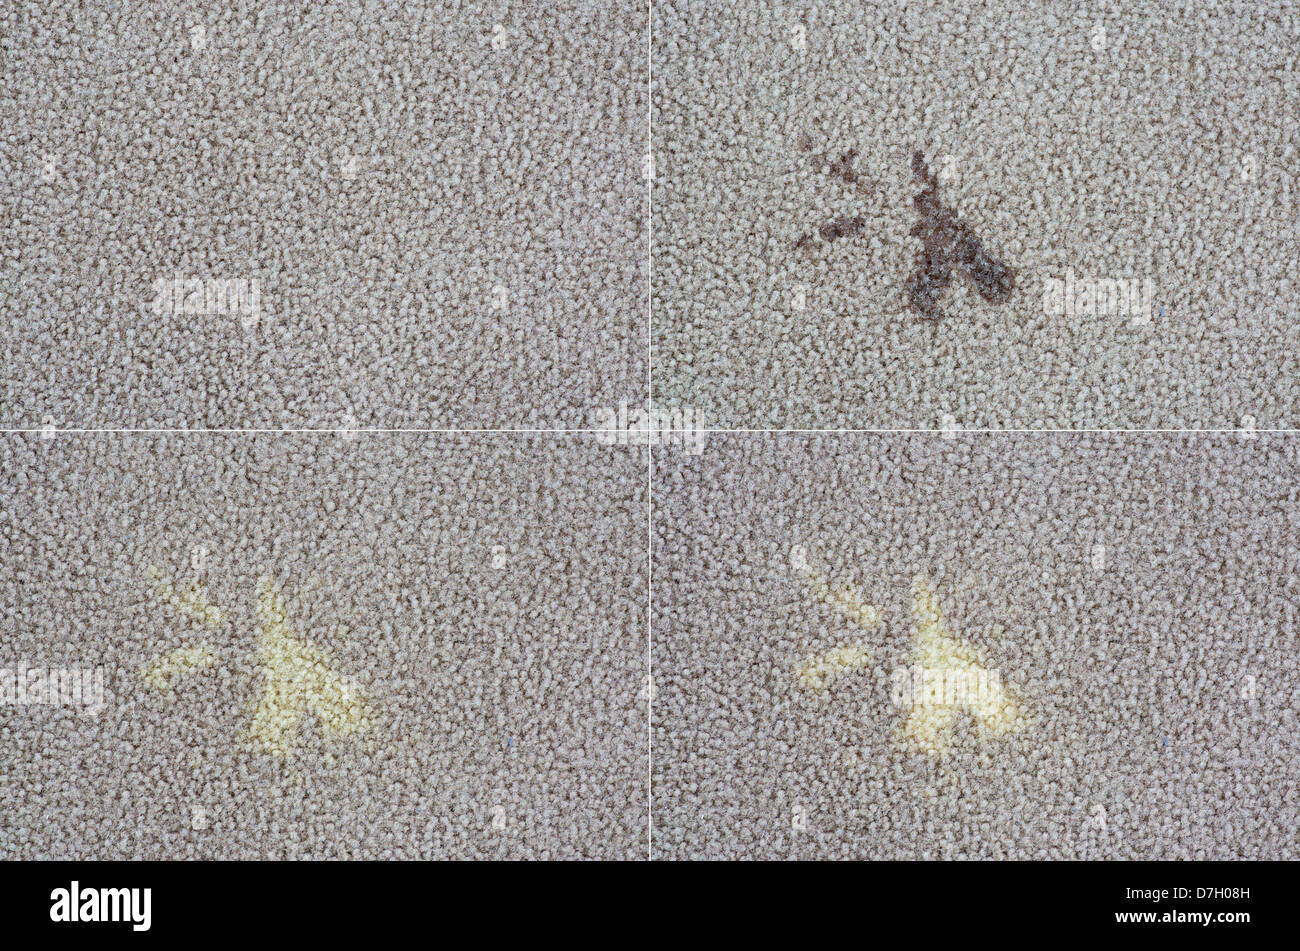 a series of four images before during and after a bleach spill on a carpet showing the stain Stock Photo